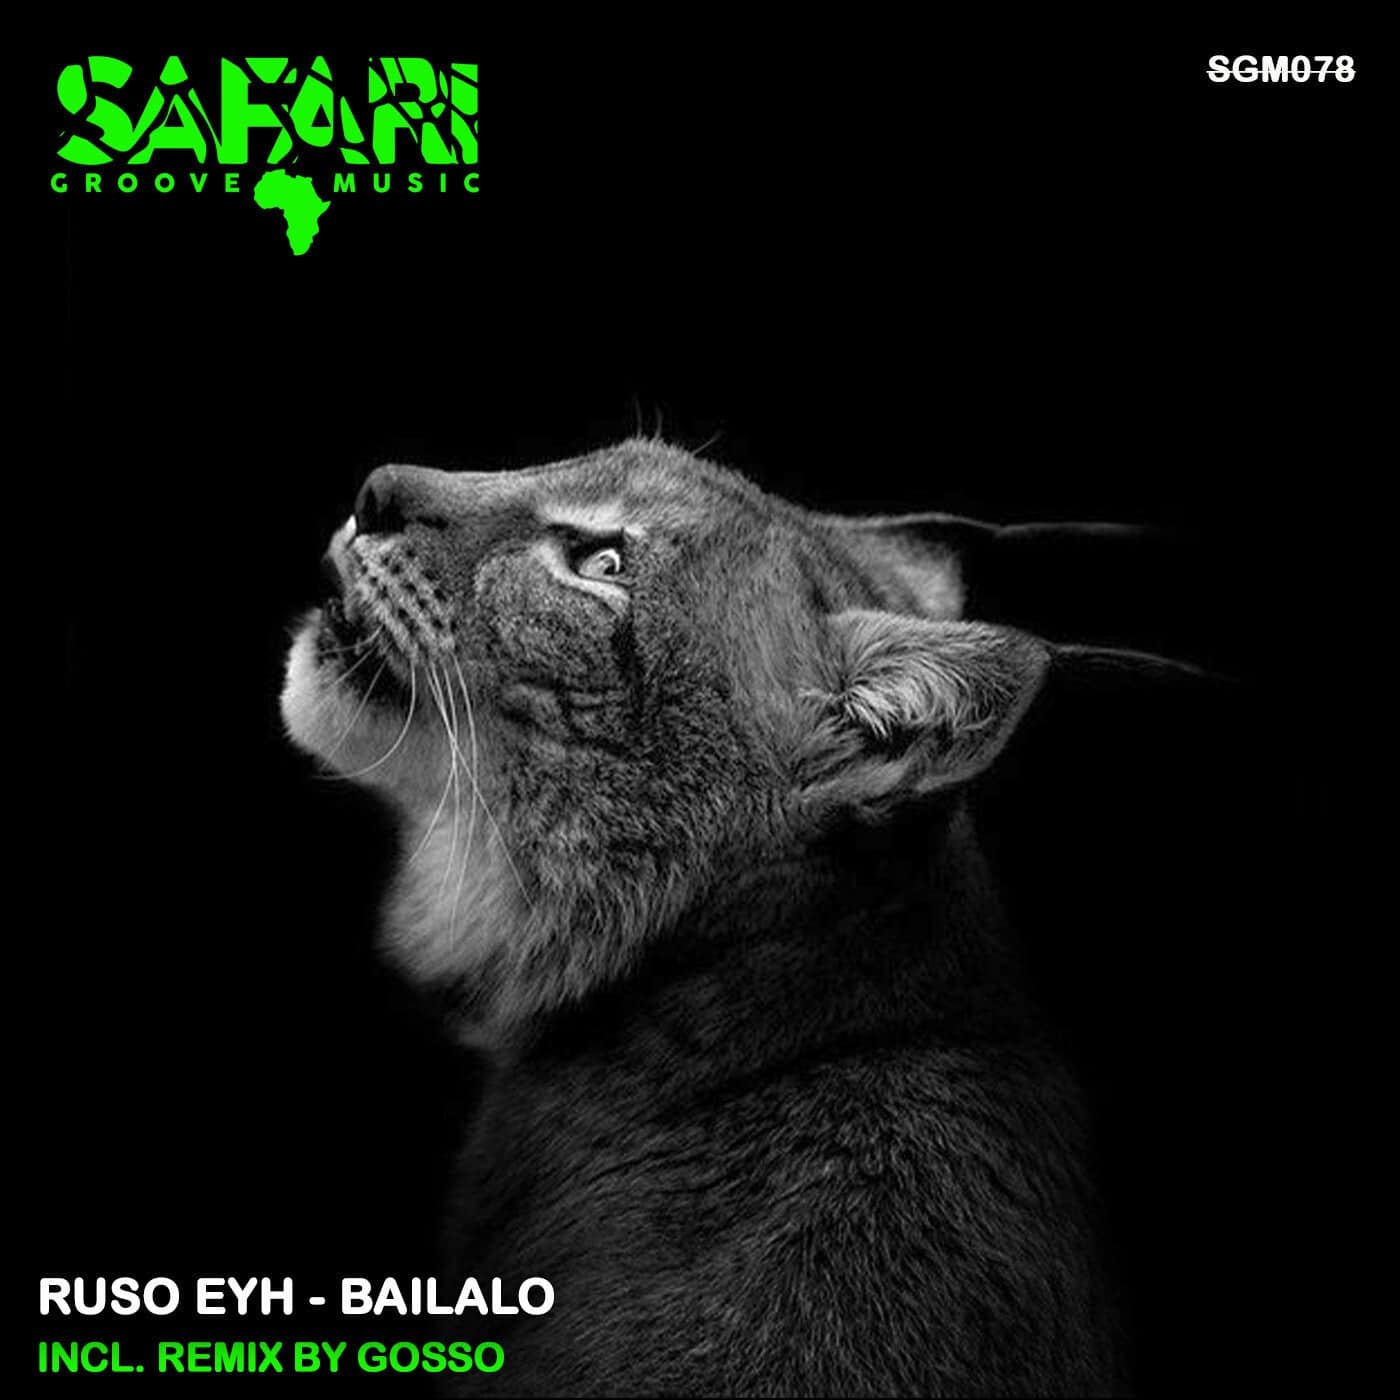 image cover: Bailalo by Ruso Eyh on Safari Groove Music